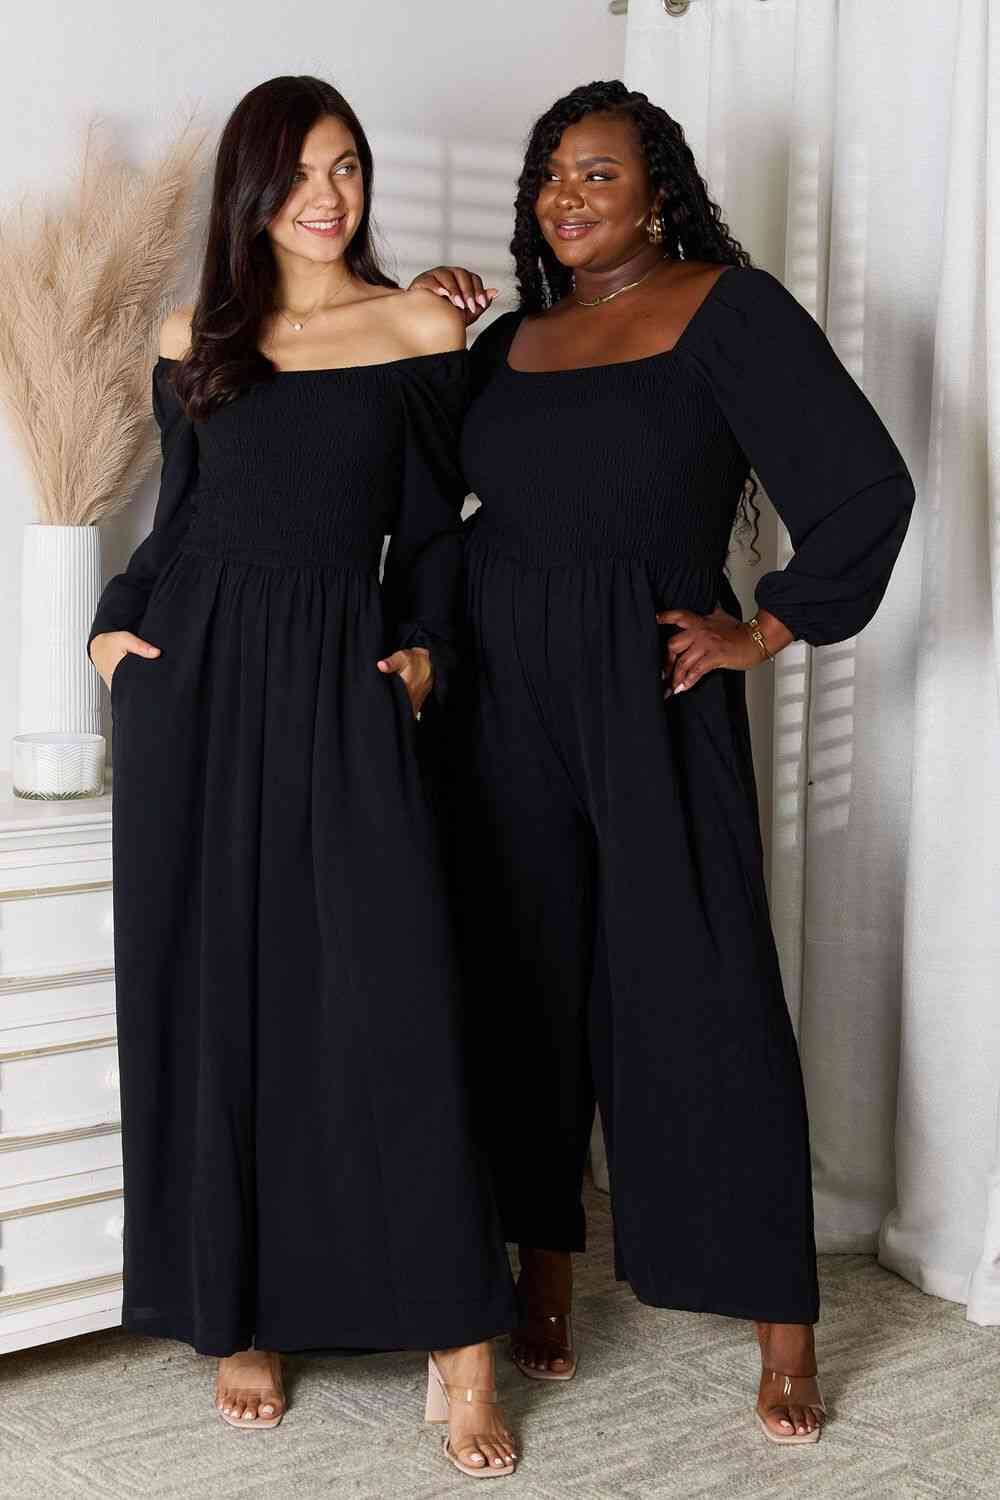 Double Take Black Smocked Square Neck Jumpsuit with Pockets Jumpsuits & Rompers jehouze 